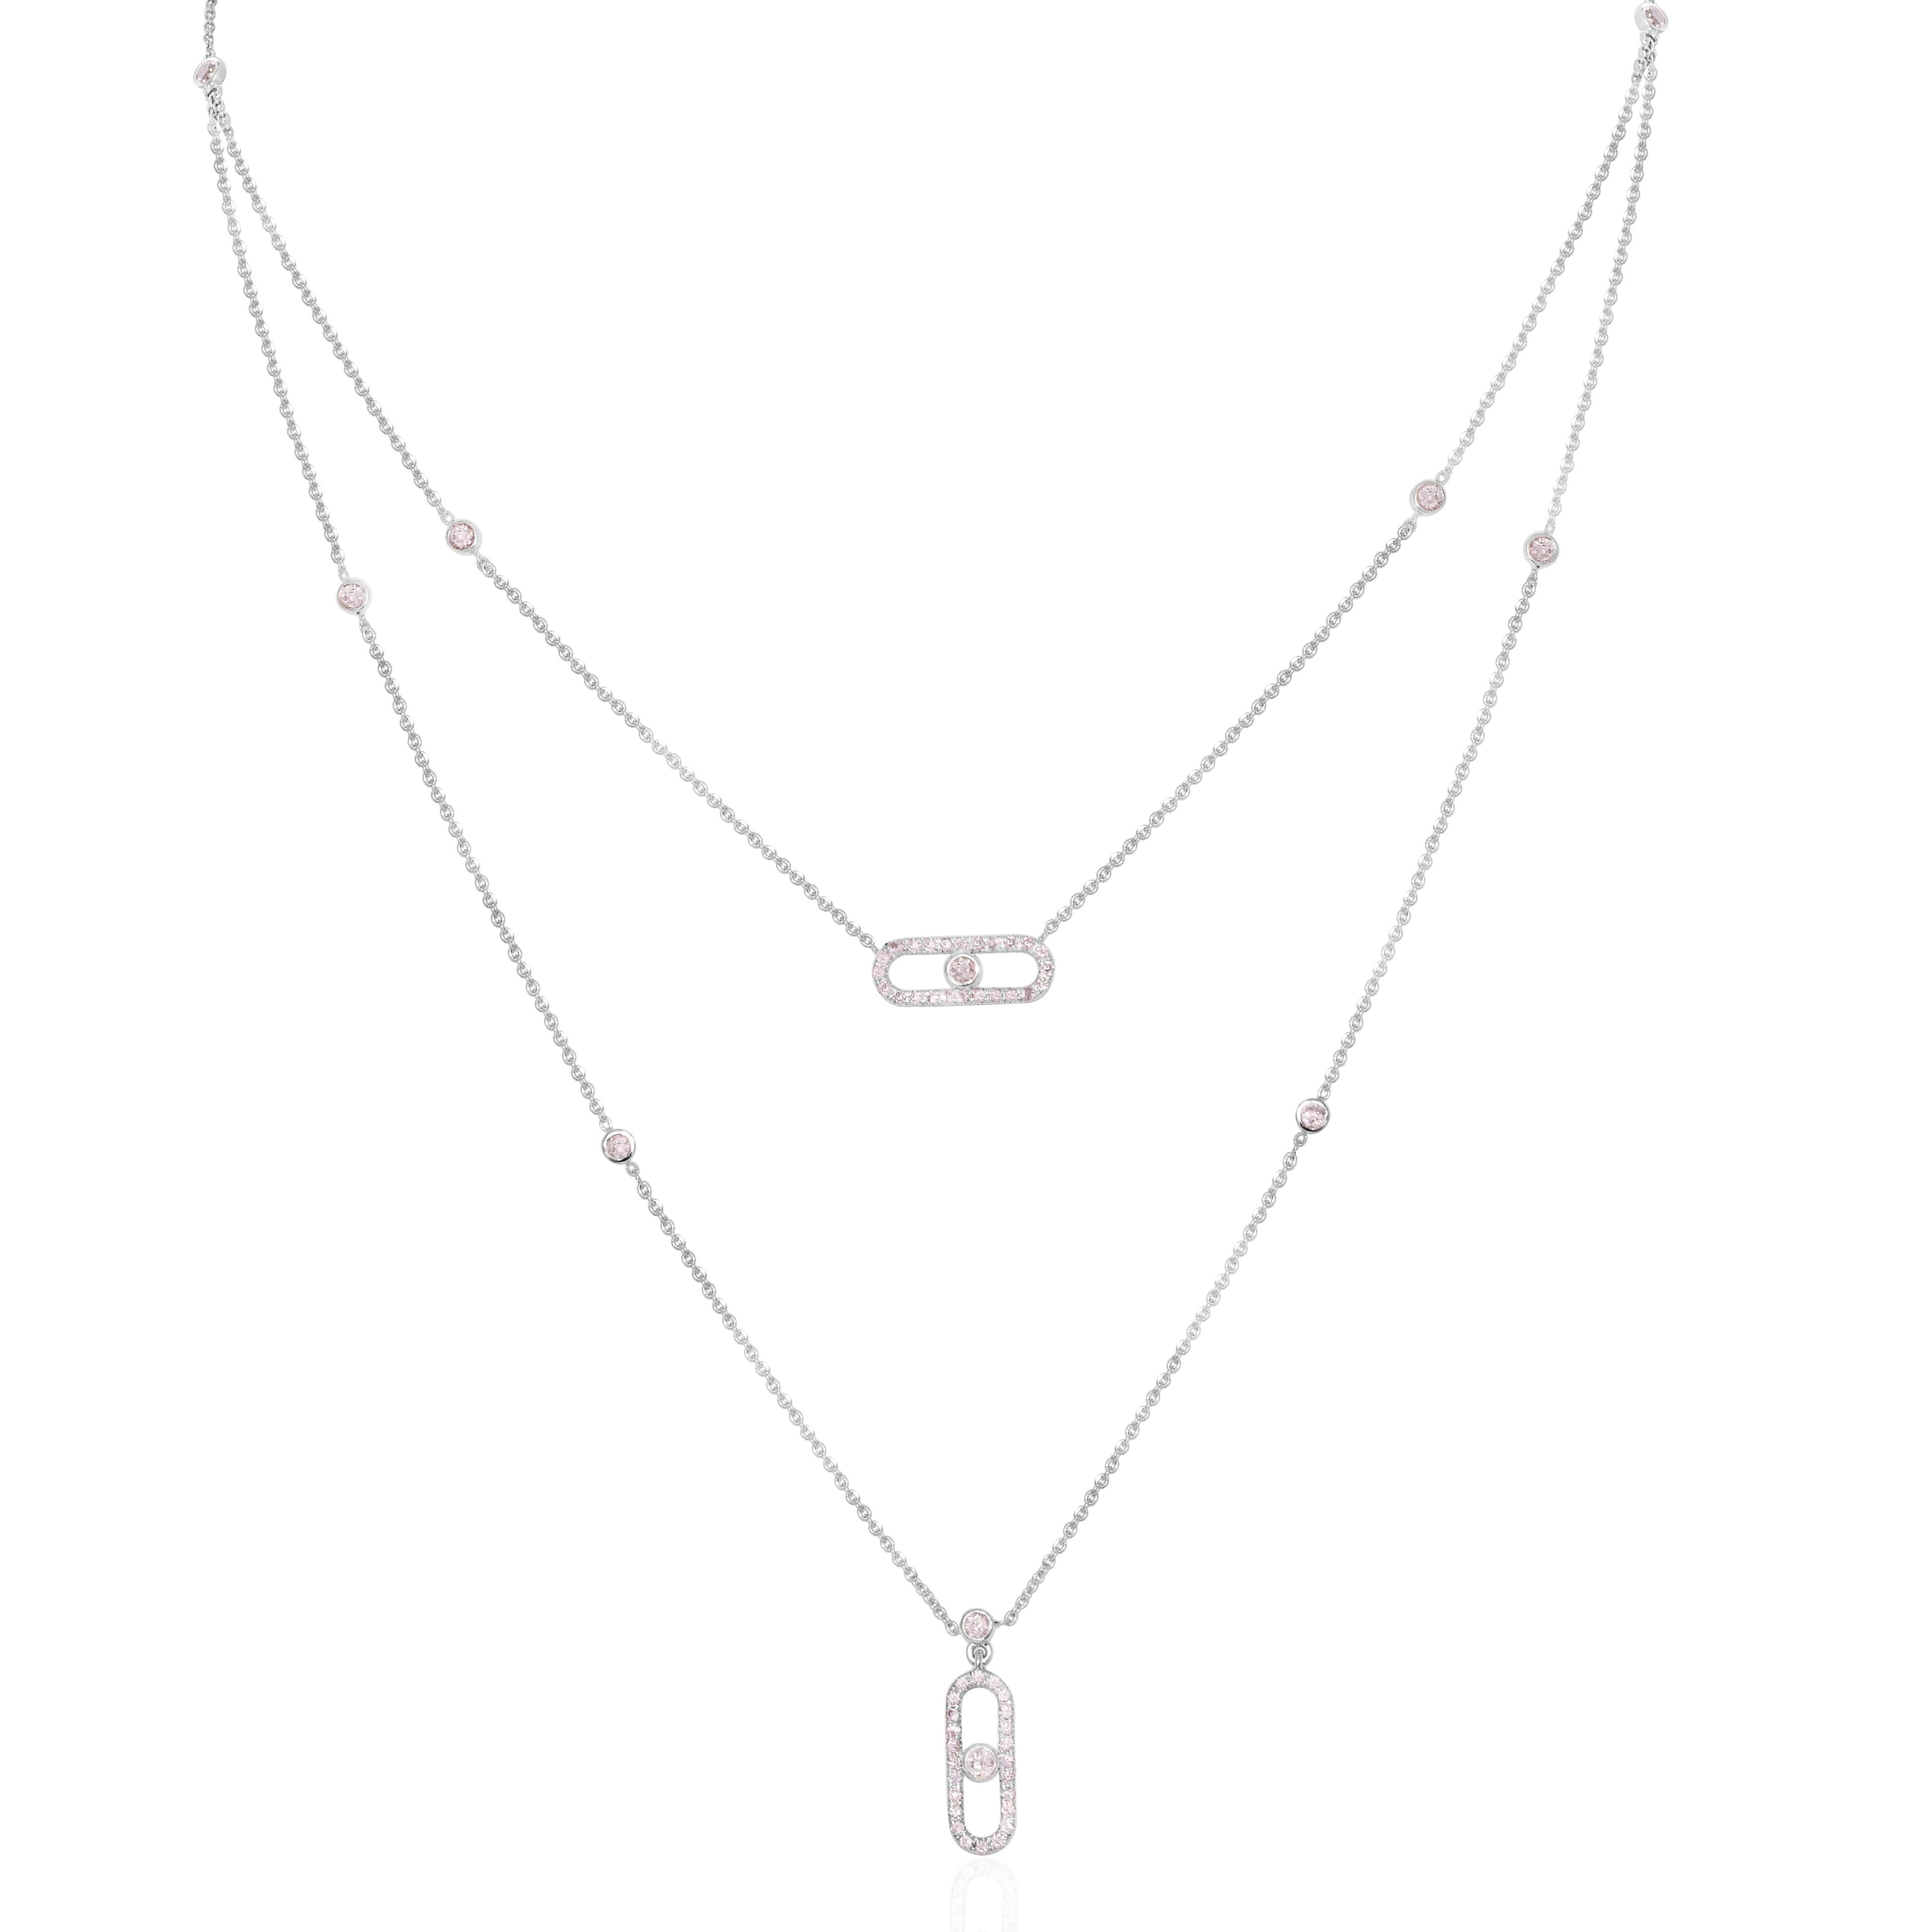 *IGI 14K 0.80 ct Natural Pink Diamonds  Art Deco Design Necklace*

This band features a stunning art deco design crafted from 14K white gold. It is set with natural pink diamonds weighing 0.80 carats.

This necklace features colorful natural